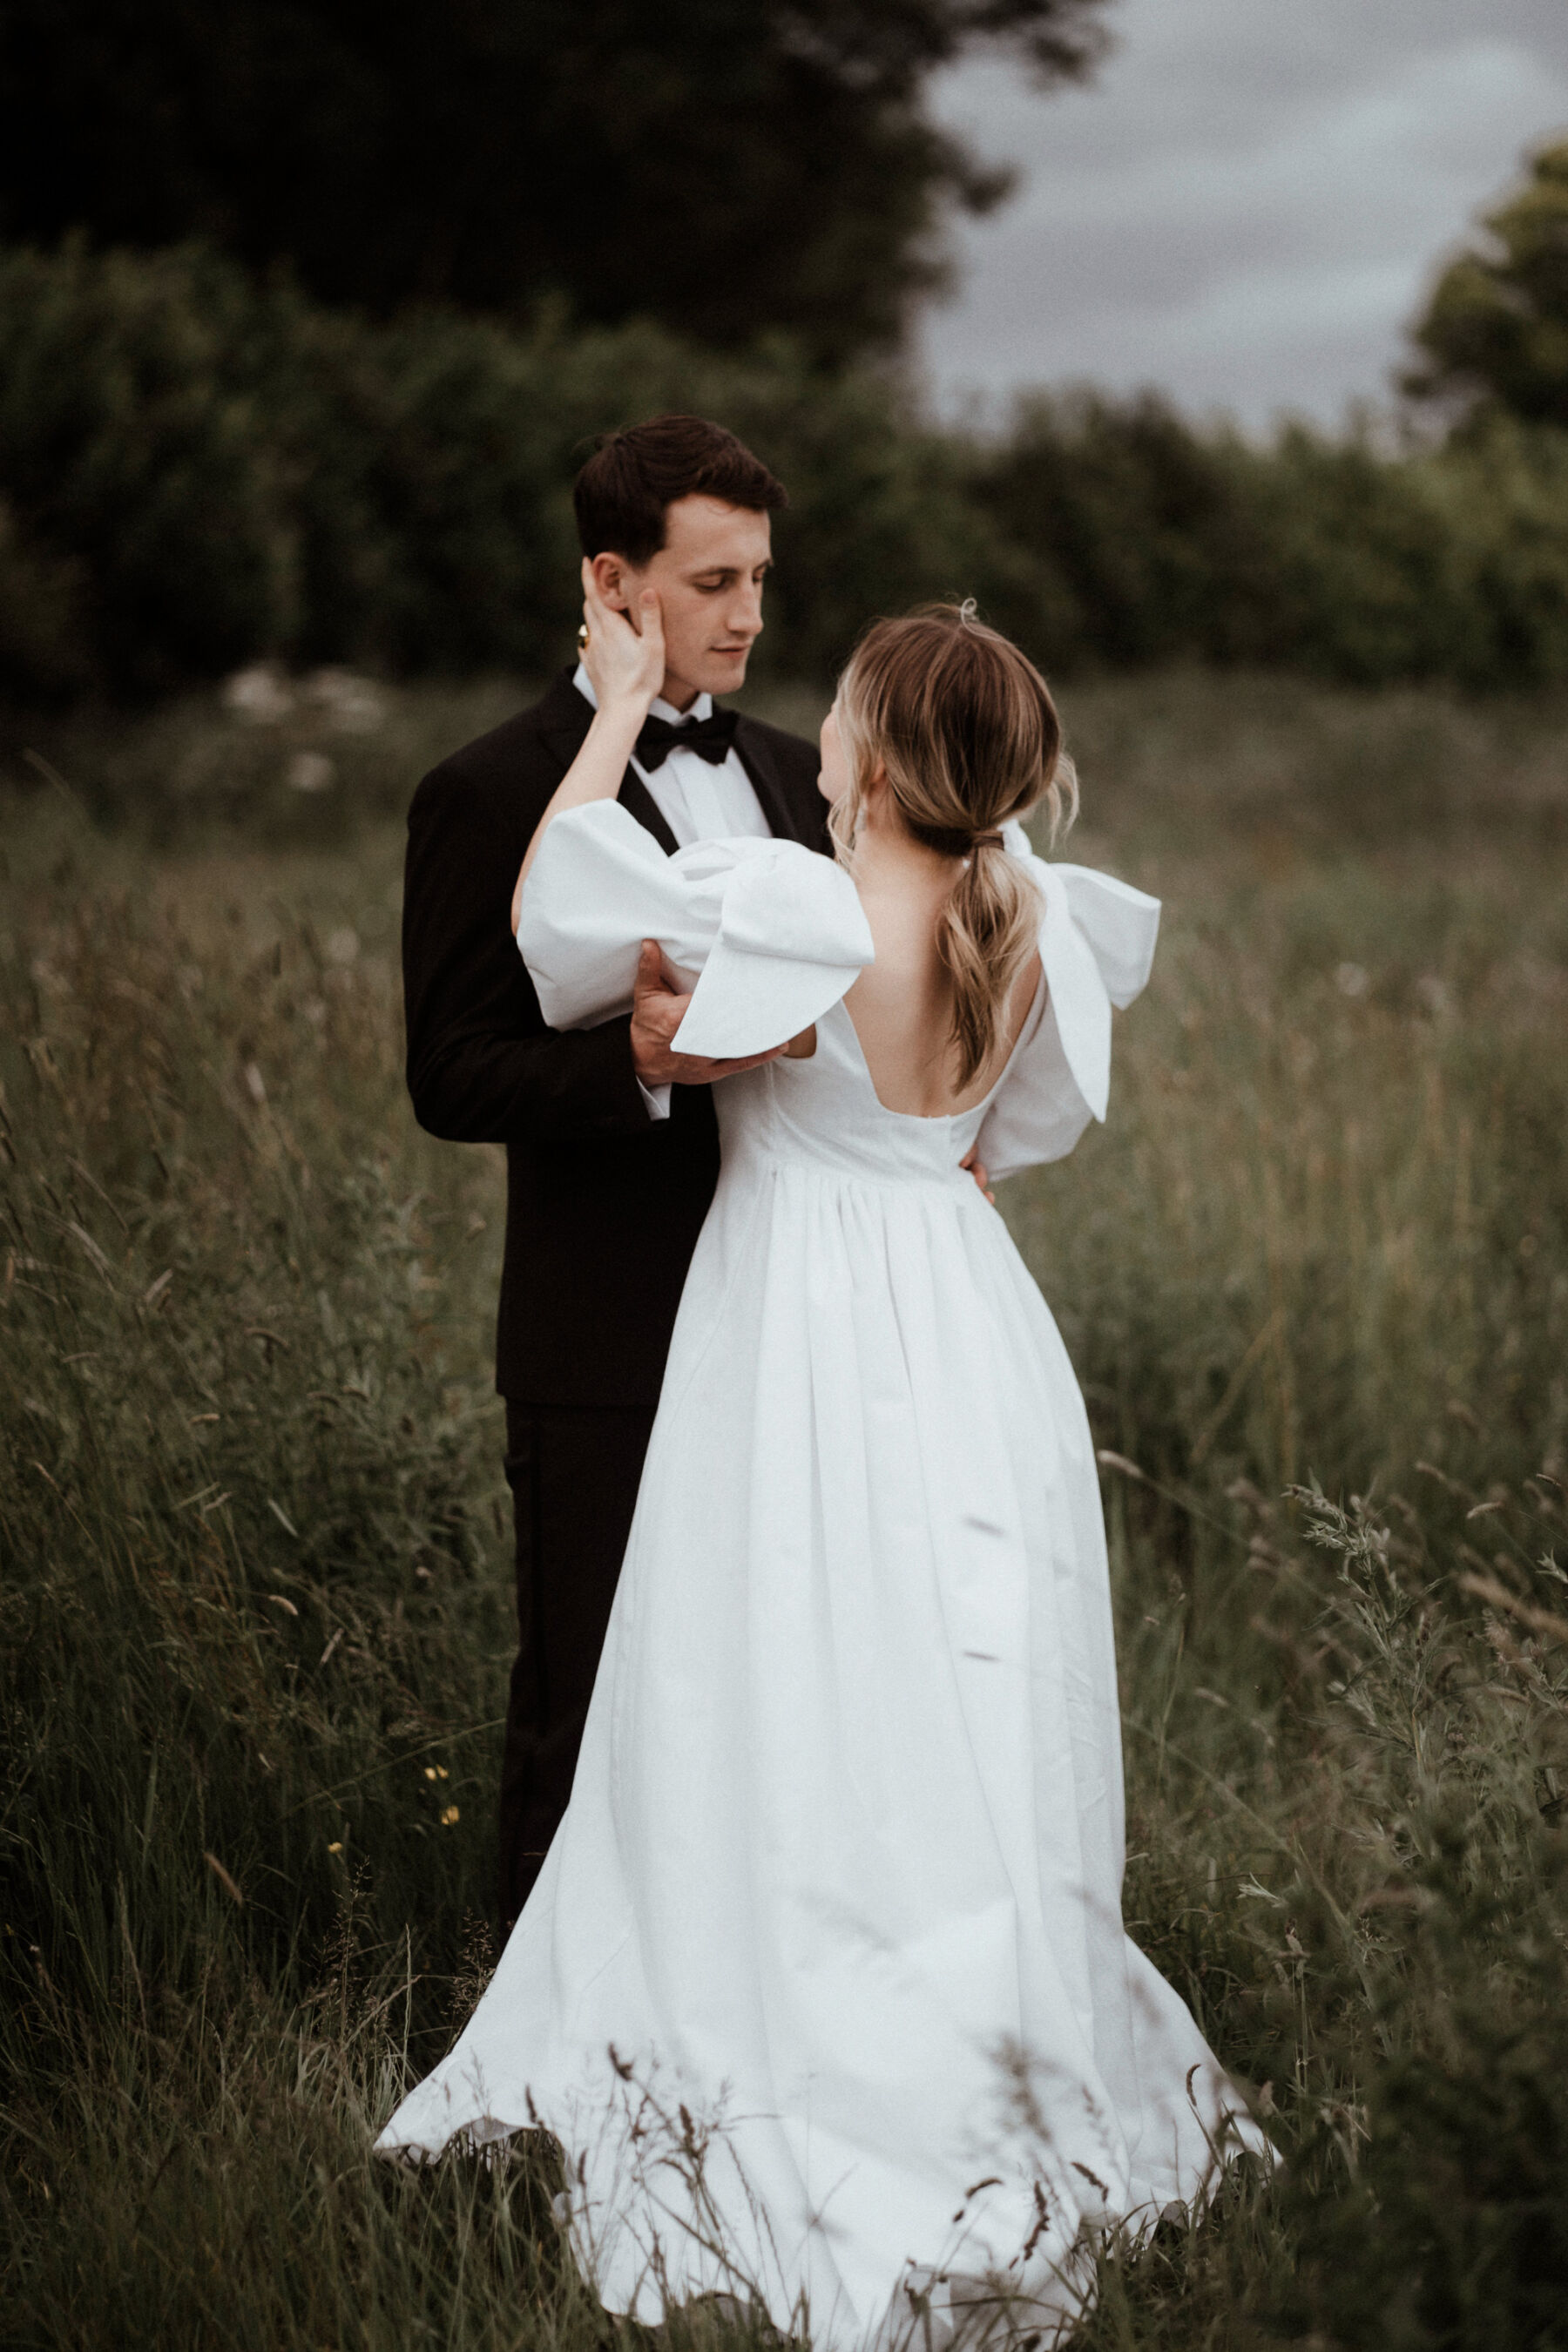 Real bride wearing a Wilden London wedding dress with oversized bows on the shoulders. Image by Rebecca Rees Photography.